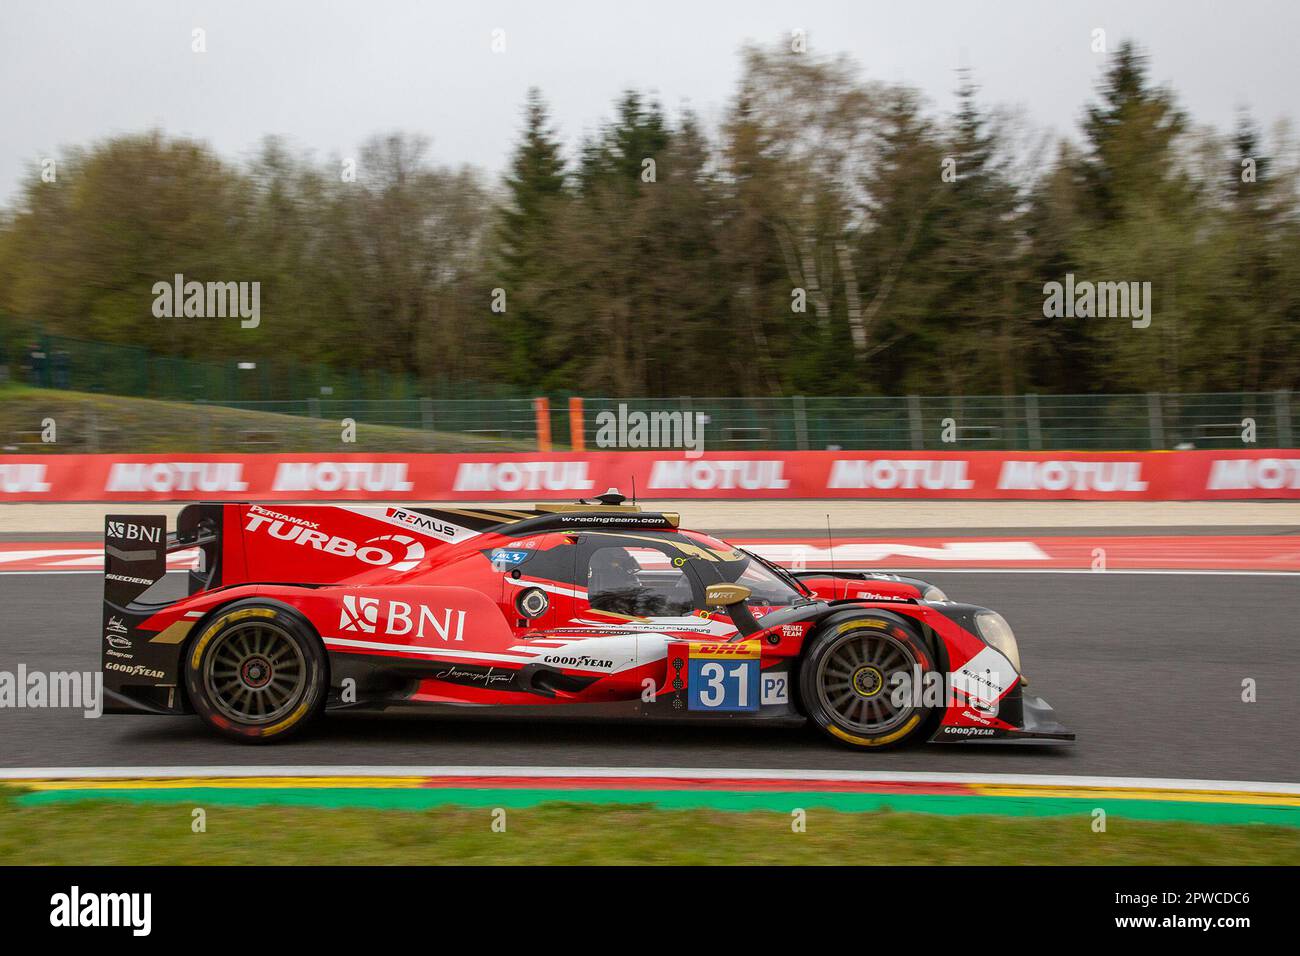 Spa Francorchamps, Belgium. 29th Apr, 2023. # 31, SPA-Francorchamps, Belgium, Saturday 29th of APRIL 2023: Sean Gelael, Ferdinand Habsburg-Lothringen, Robin Frijns, Team WRT, Oreca 07 - Gibson car, LMP2 Class, during the race SPA-FRANCORCHAMPS 6 hours race on April 29th. The WRT team races in the LMP2 class in the FIA WEC World Championship long distance event on the Belgian Ardennes circuit, fee liable image, Photo copyright © ATP Geert FRANQUET (FRANQUET Geert/ATP/SPP) Credit: SPP Sport Press Photo. /Alamy Live News Stock Photo